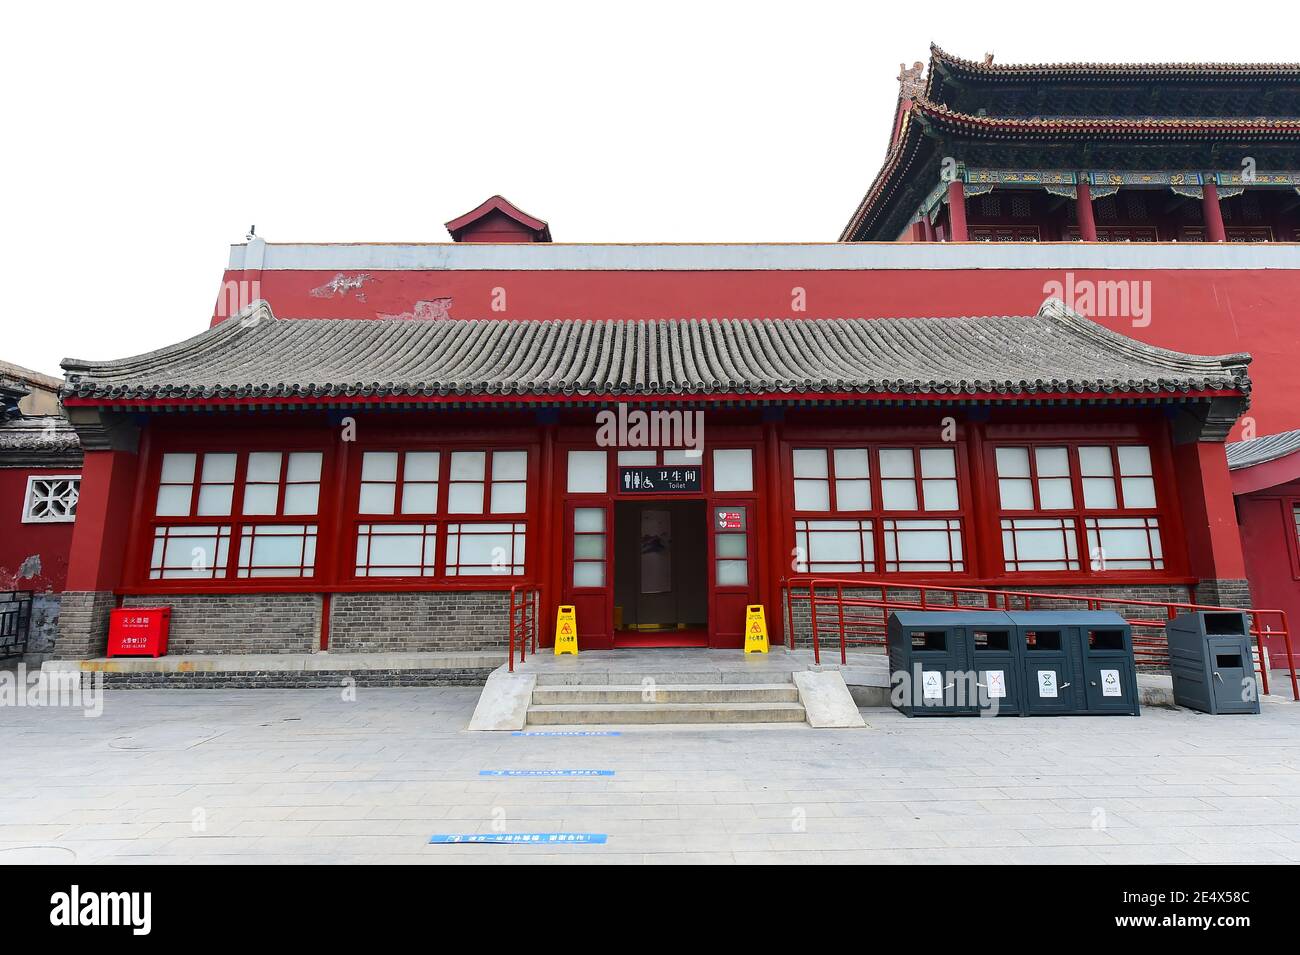 The exterior view of the newly finished toilet, which combines many traditional Chinese elements and is built like a traditional Chinese architecture, Stock Photo